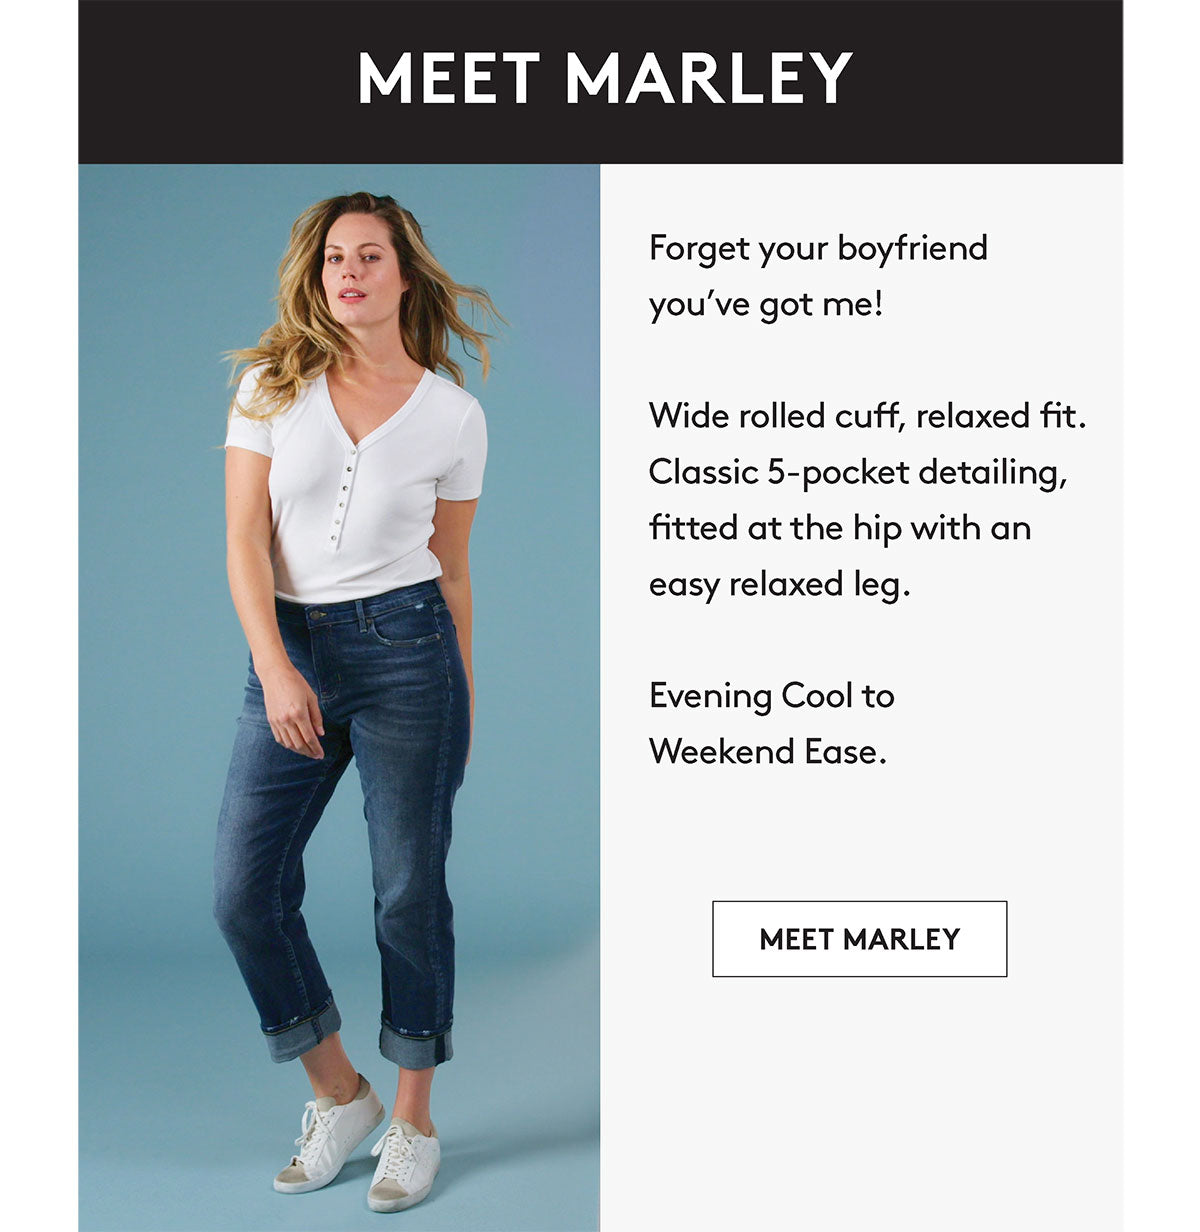 MEET MARLEY Forget your boyfriend you've got me! Wide rolled cuff, relaxed fit. Classic 5-pocket detailing, fitted at the hip with an easy relaxed leg. Evening Cool to Weekend Ease. MEET MARLEY